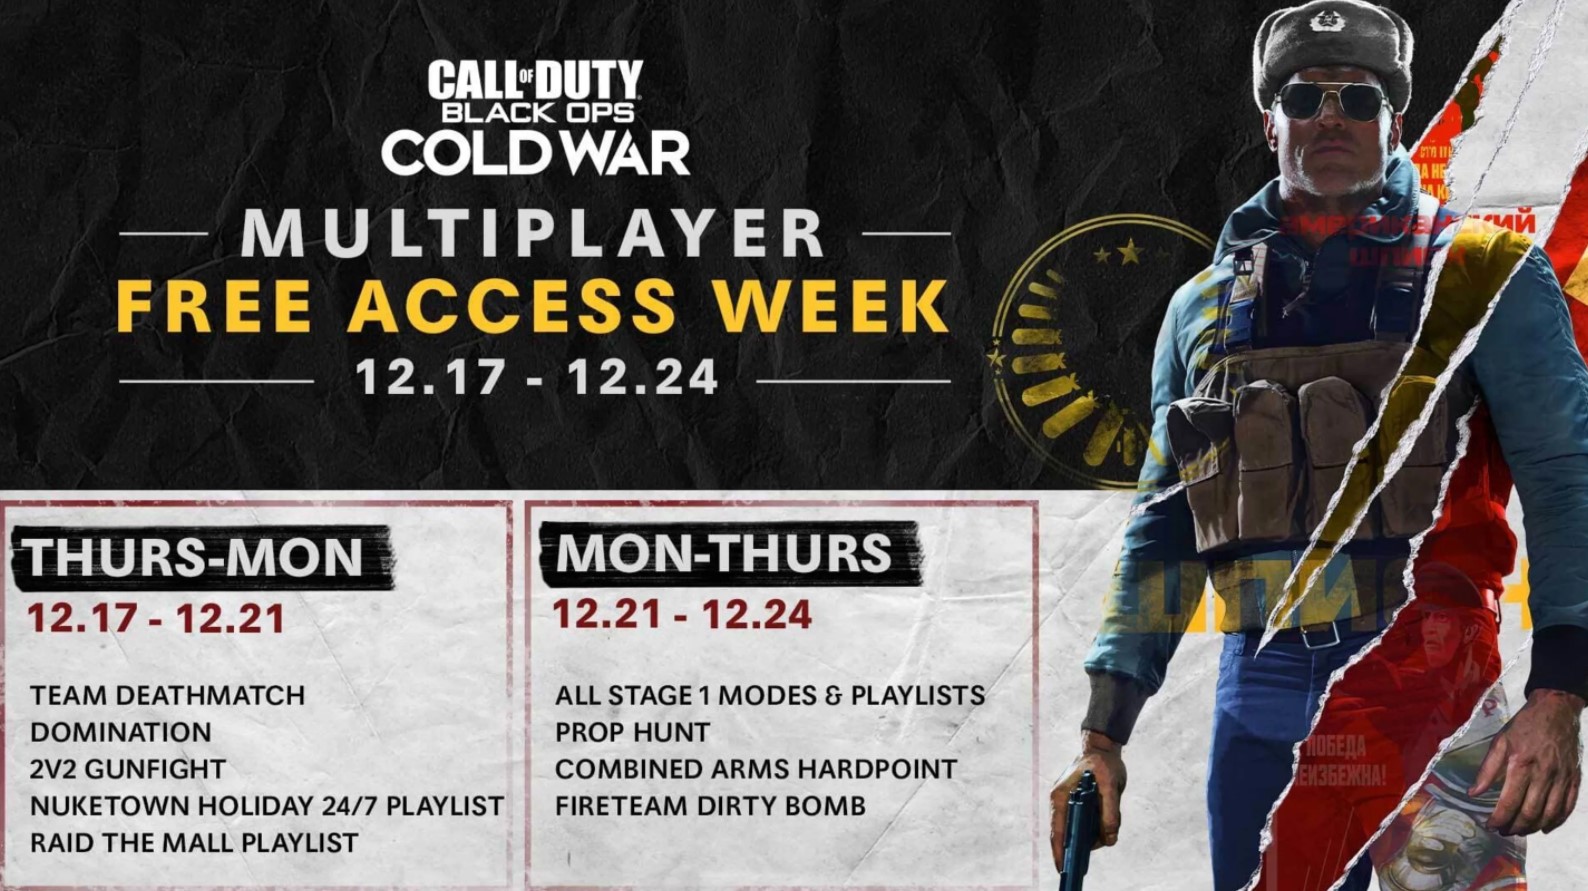 COD: Black Ops Cold War Multiplayer – Free Access Week